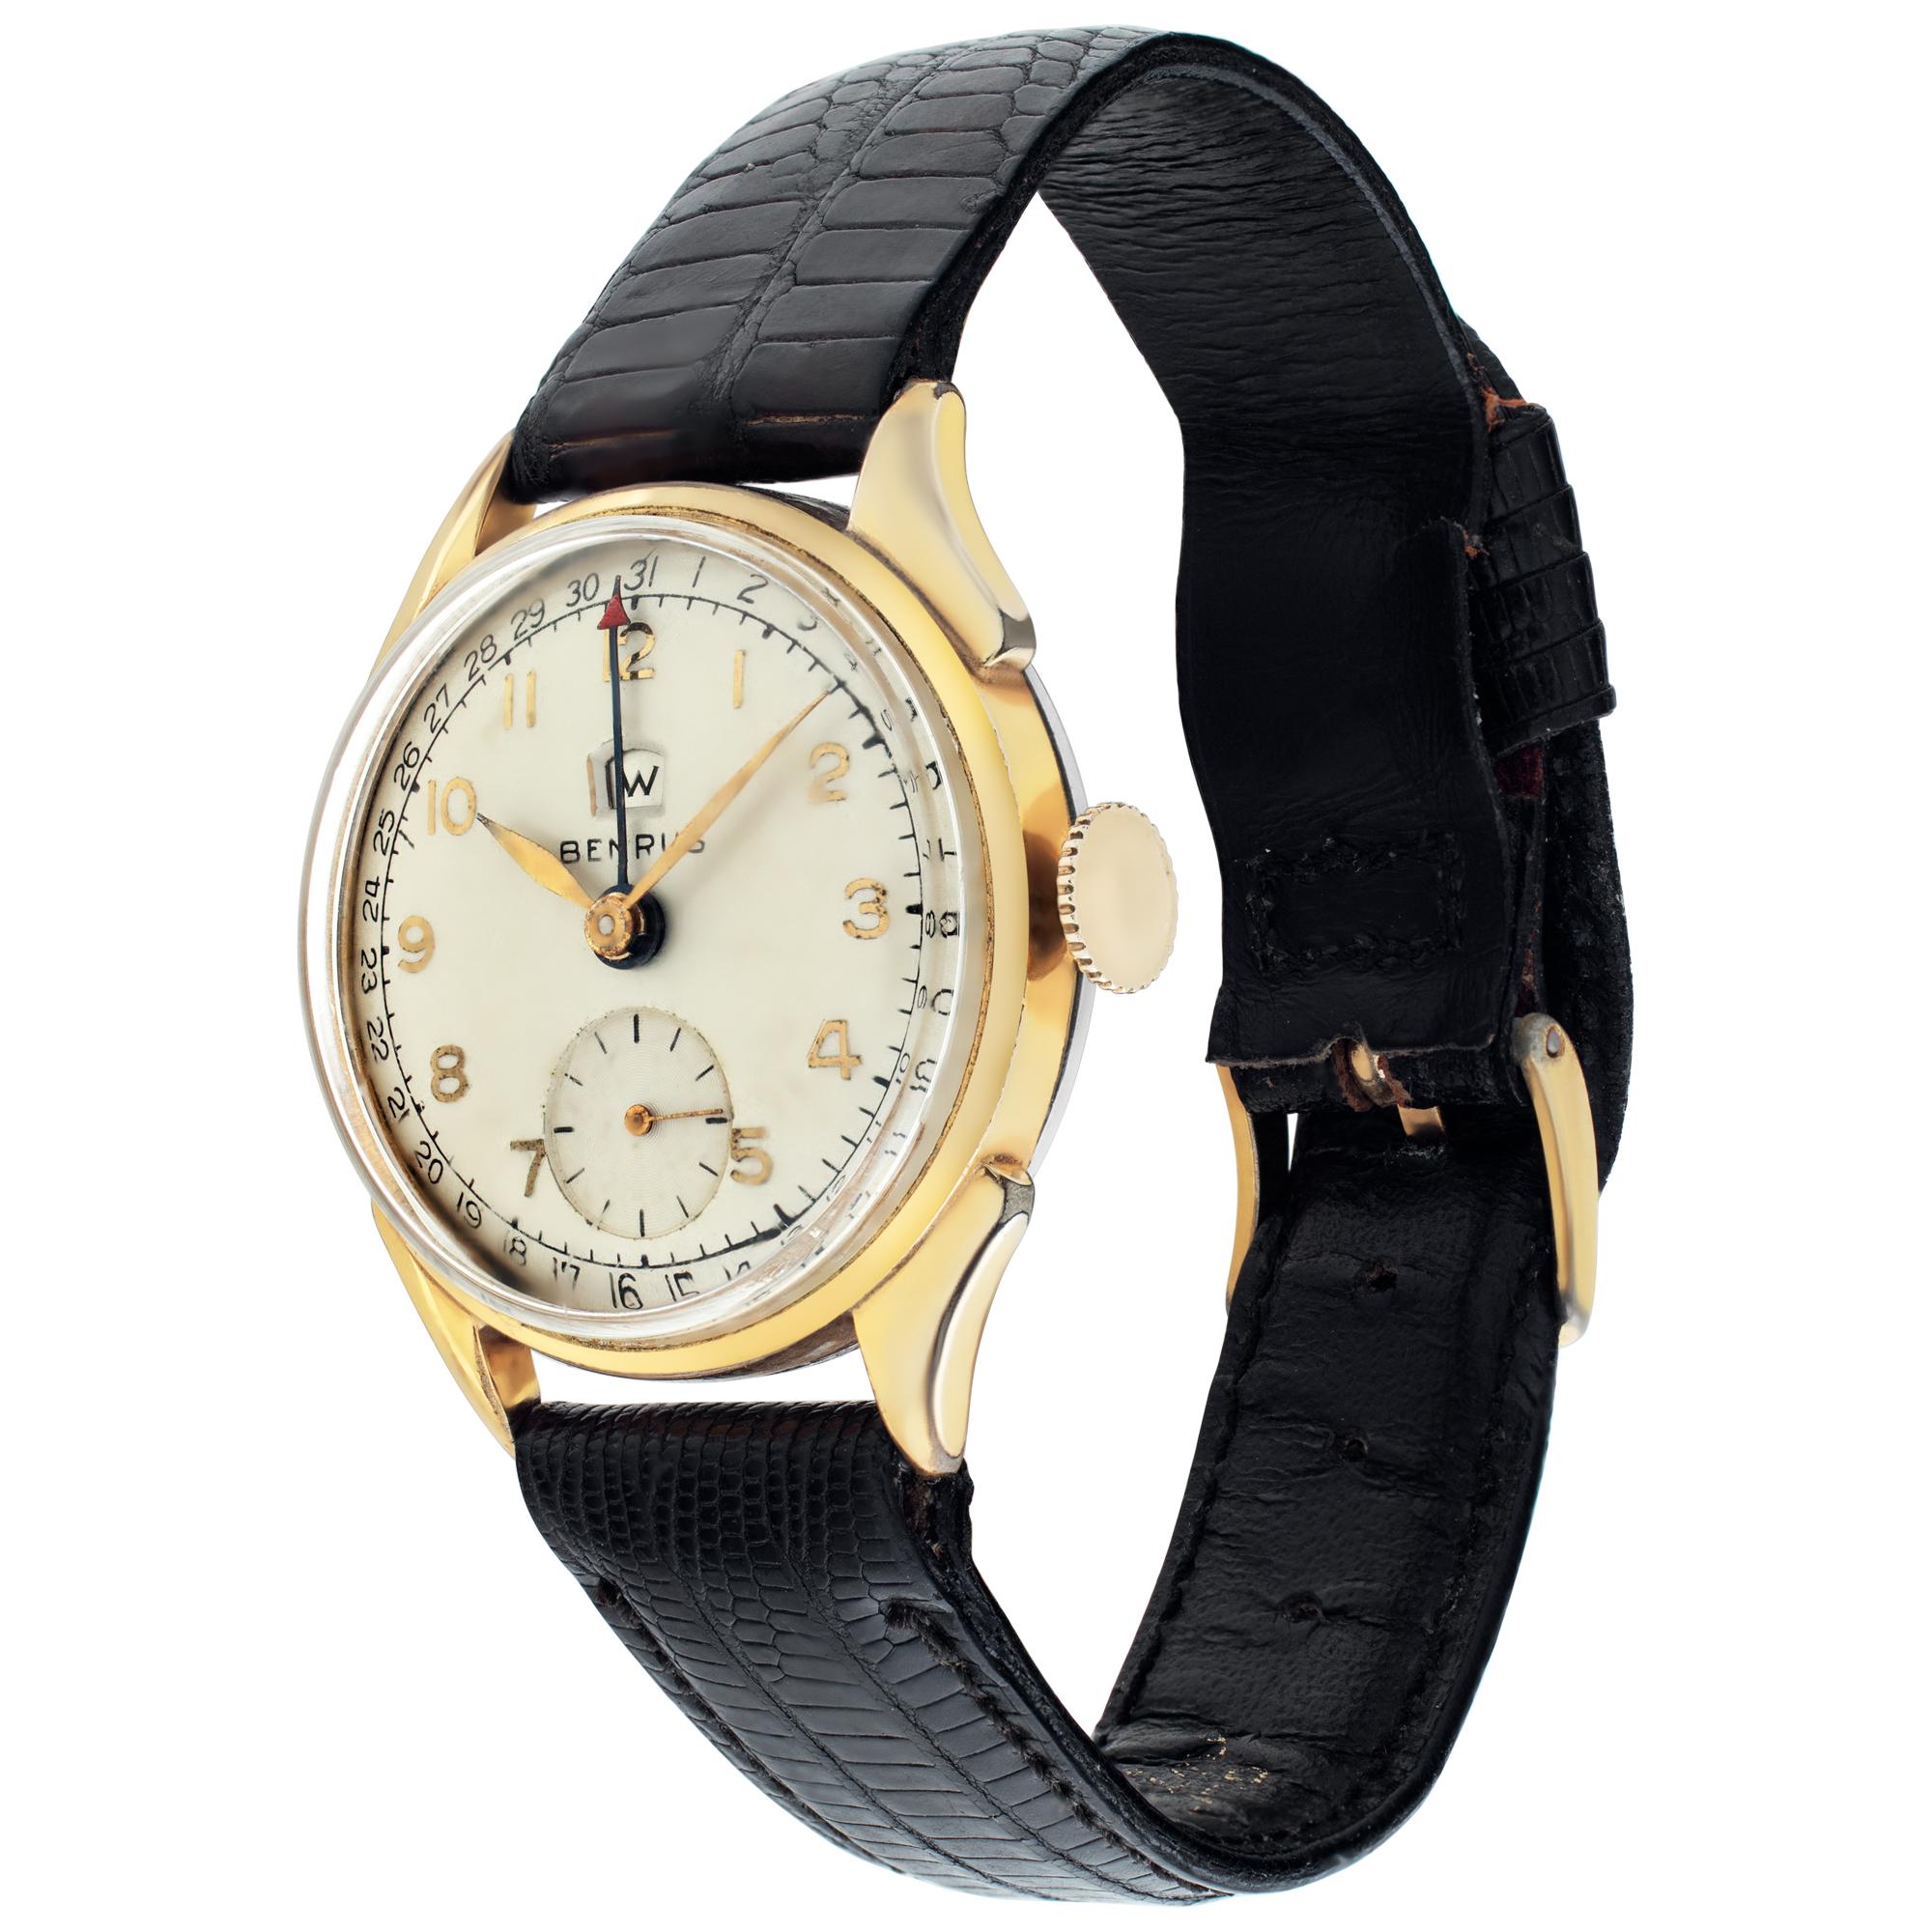 Benrus with gold filled case on leather strap. With subseconds. Subsidary seconds. Day of the week window, date hand Fine Pre-owned Benrus Watch. Certified preowned Vintage Benrus Classic watch on a plaque bracelet with a Gold Fill tang buckle. This